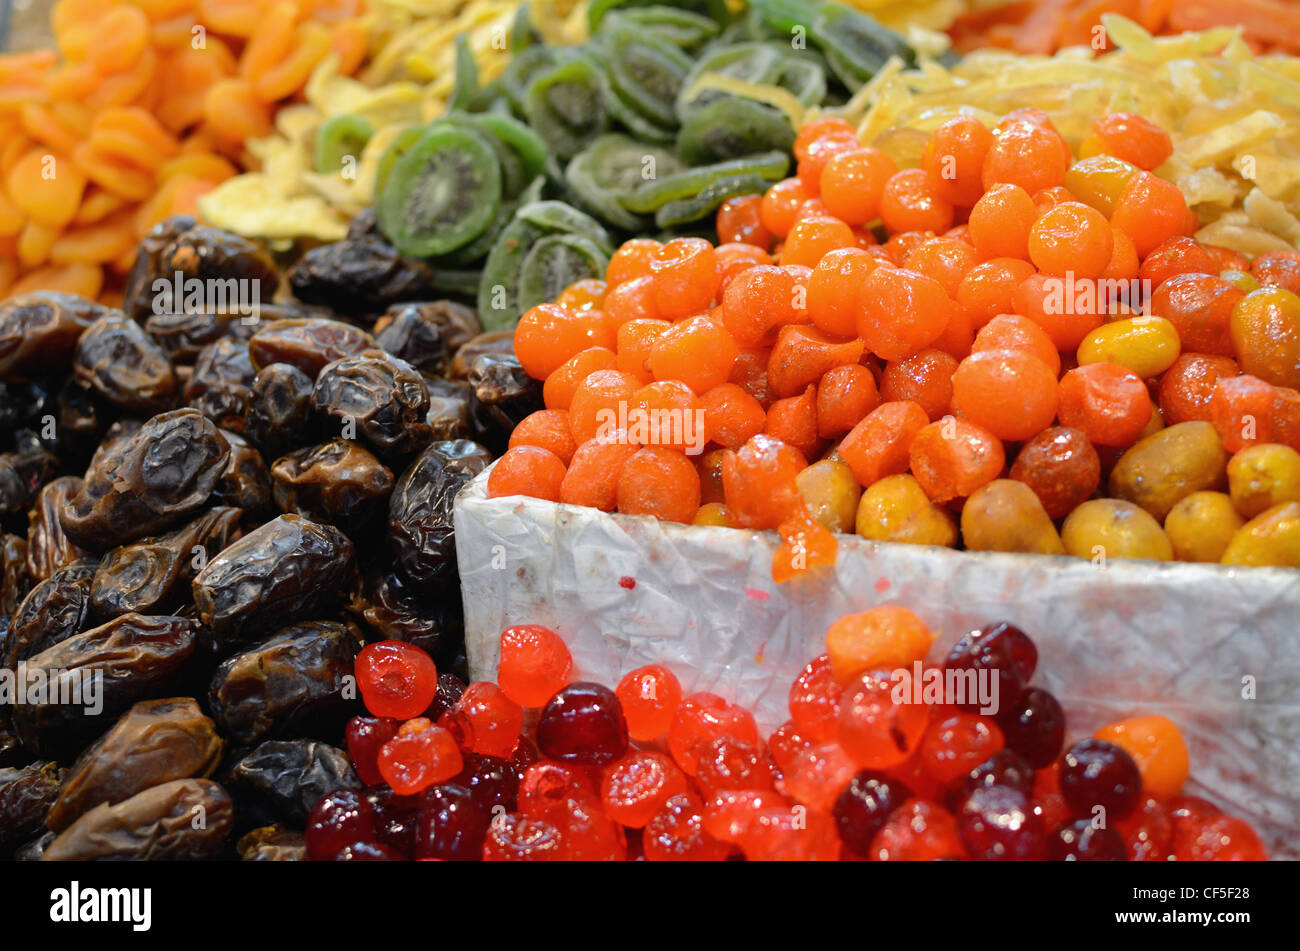 Dried fruits on display at a market Stock Photo